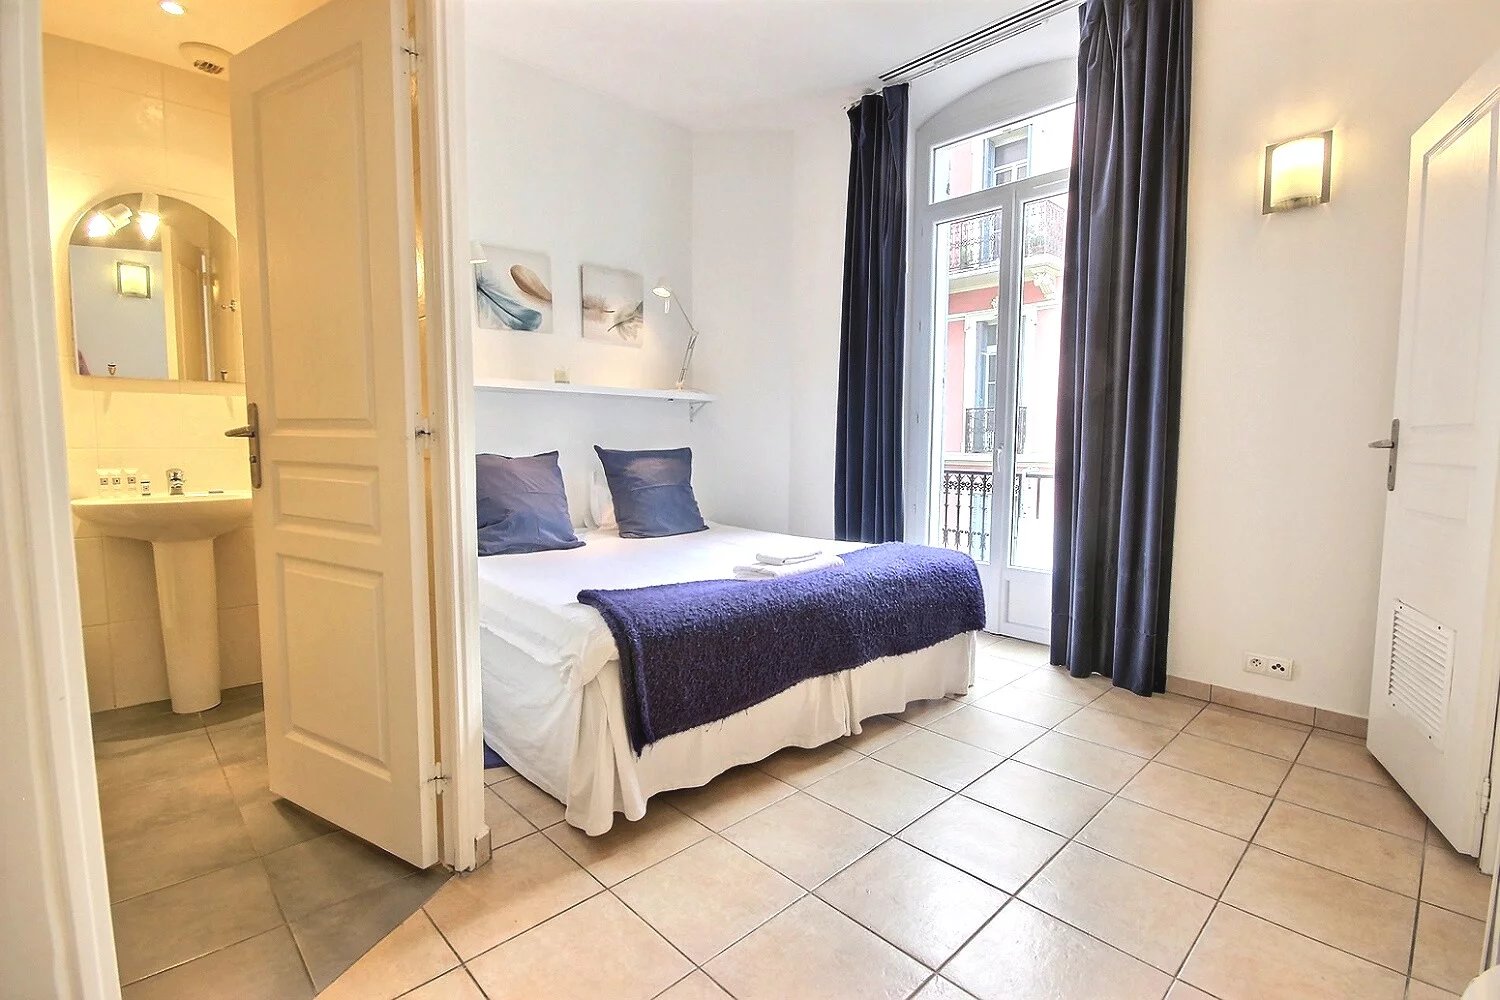 Luxurious 4/5 Room Apartment with Studio - Near Forville Market in Cannes